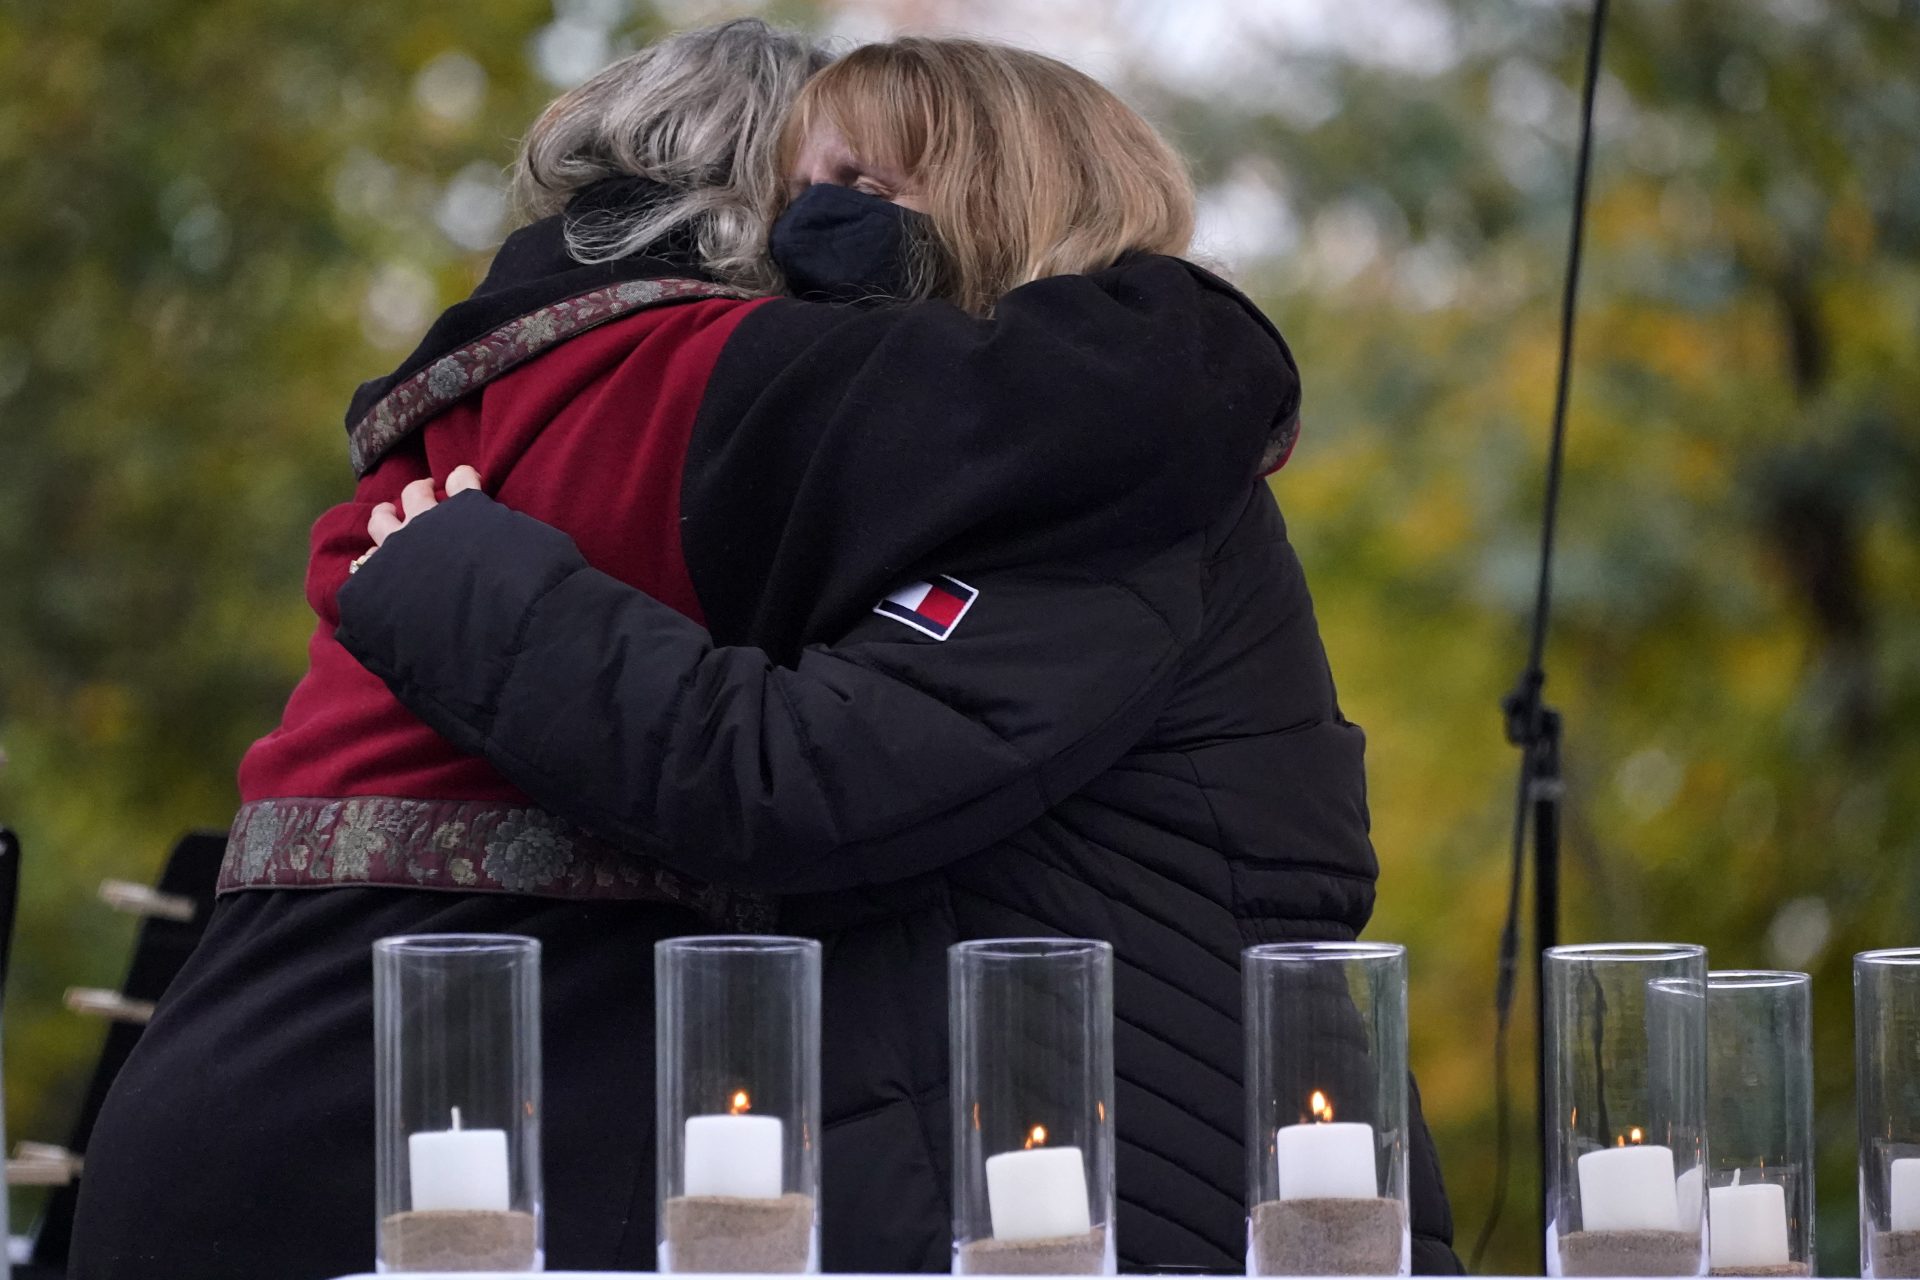 Family members embrace during a Commemoration Ceremony Wednesday, Oct. 27, 2021, in Pittsburgh, after lighting a candle in memory of Melvin Wax, one of 11 worshippers killed three years ago, when a gunman opened fire at the Tree of Life Synagogue in the Squirrel Hill neighborhood of Pittsburgh.